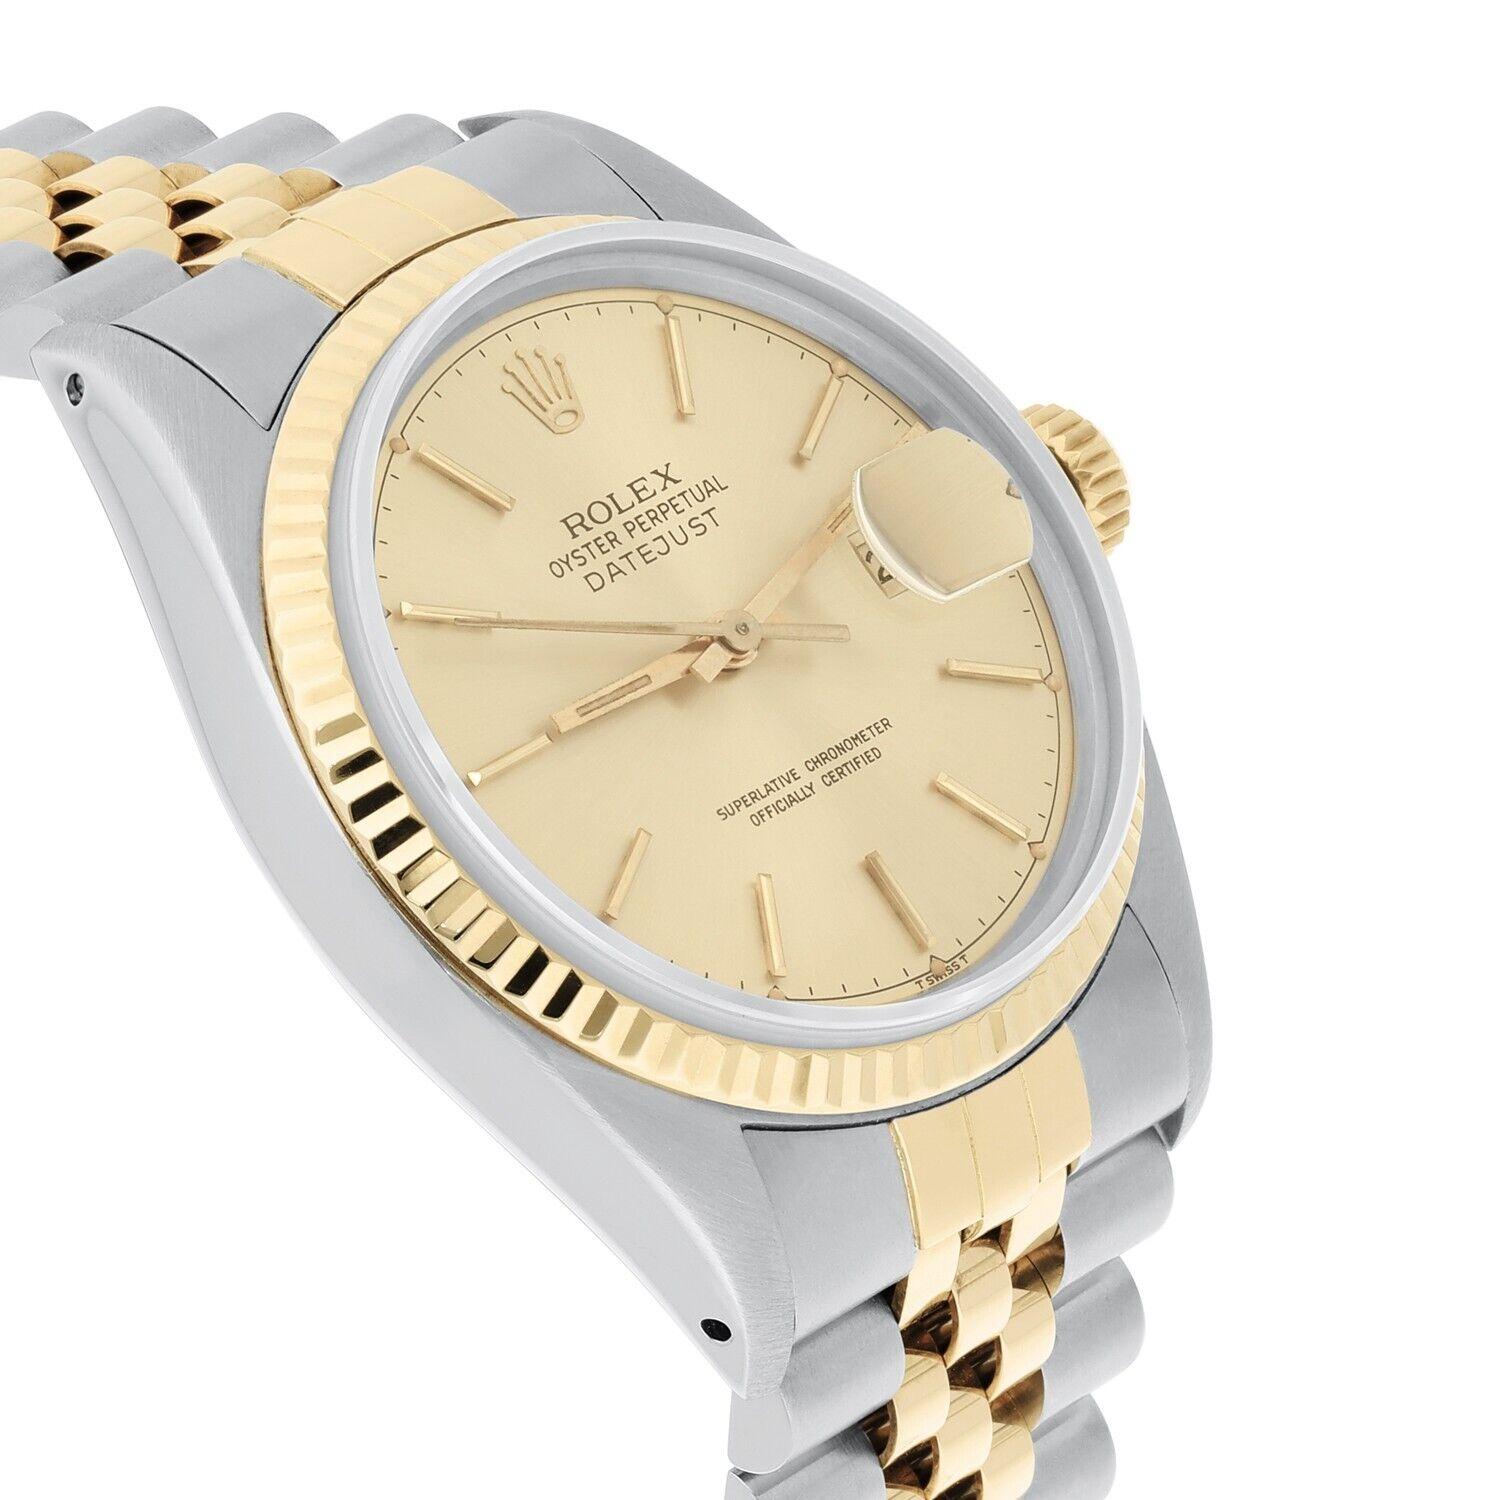 Rolex Datejust 36mm Two Tone Champagne Dial Jubilee Band 16013 Circa 1979 B/P For Sale 1